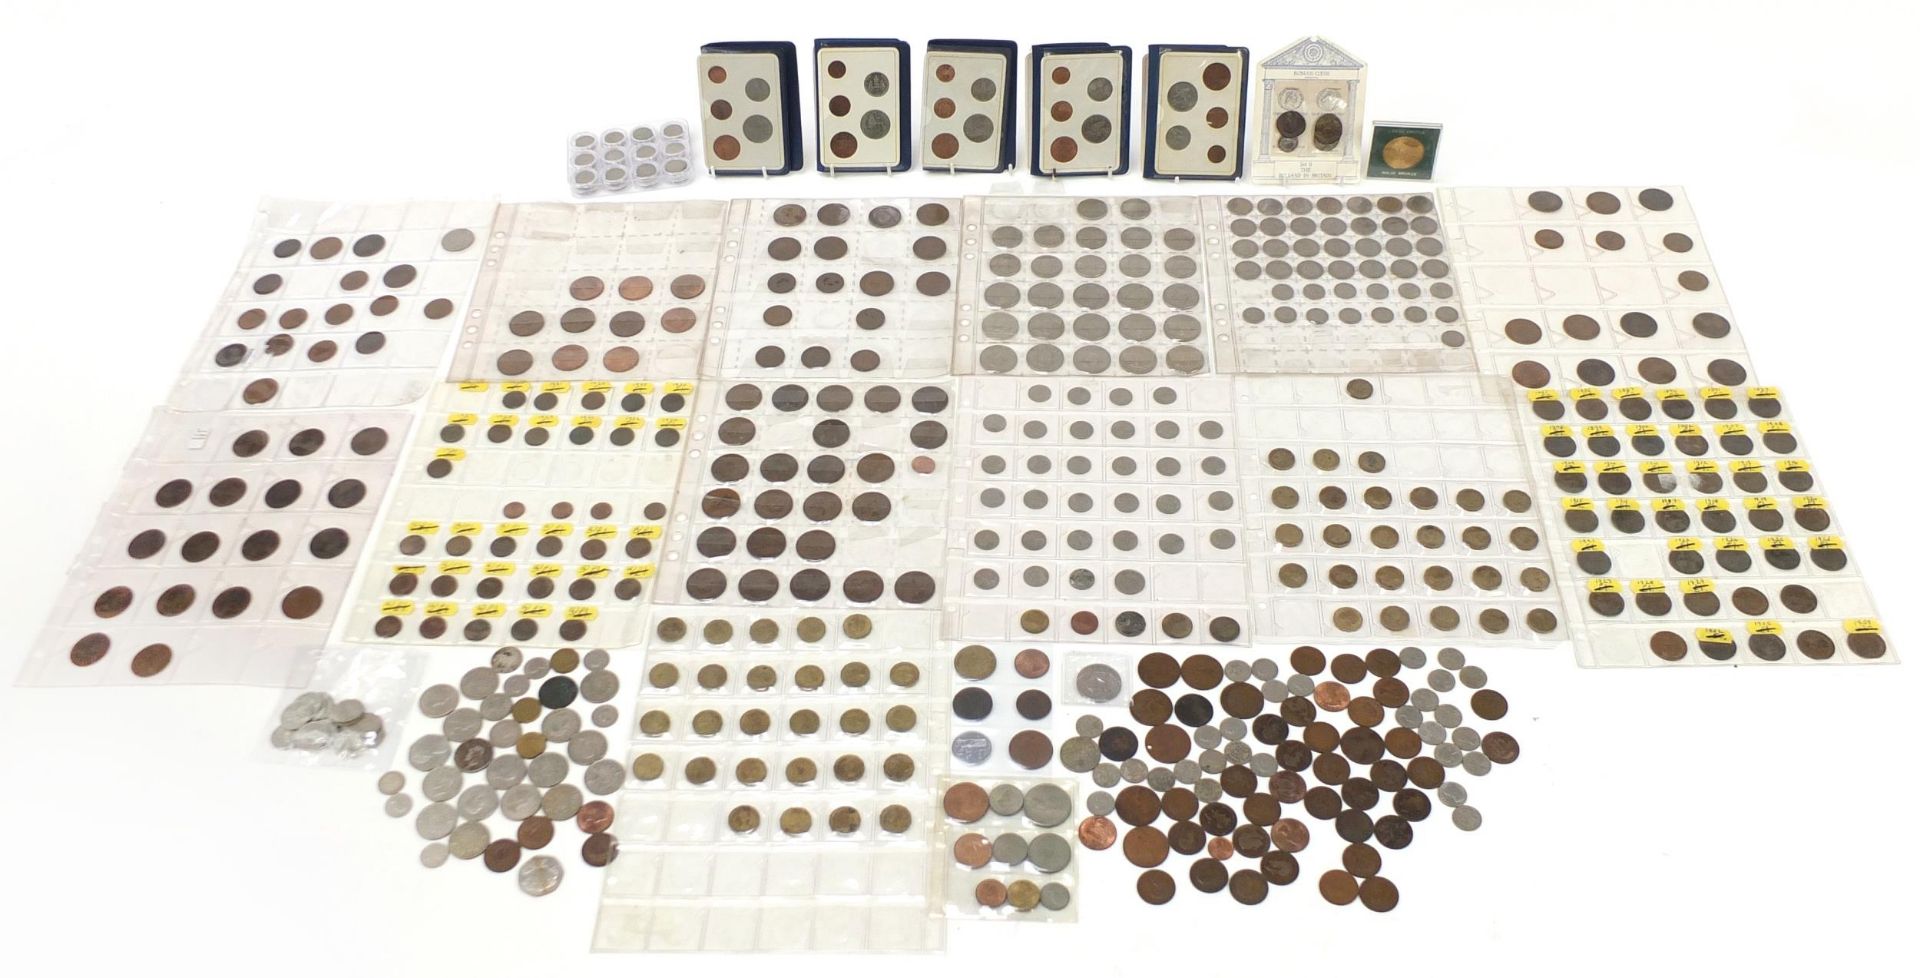 Antique and later British and world coinage including pennies and half crowns